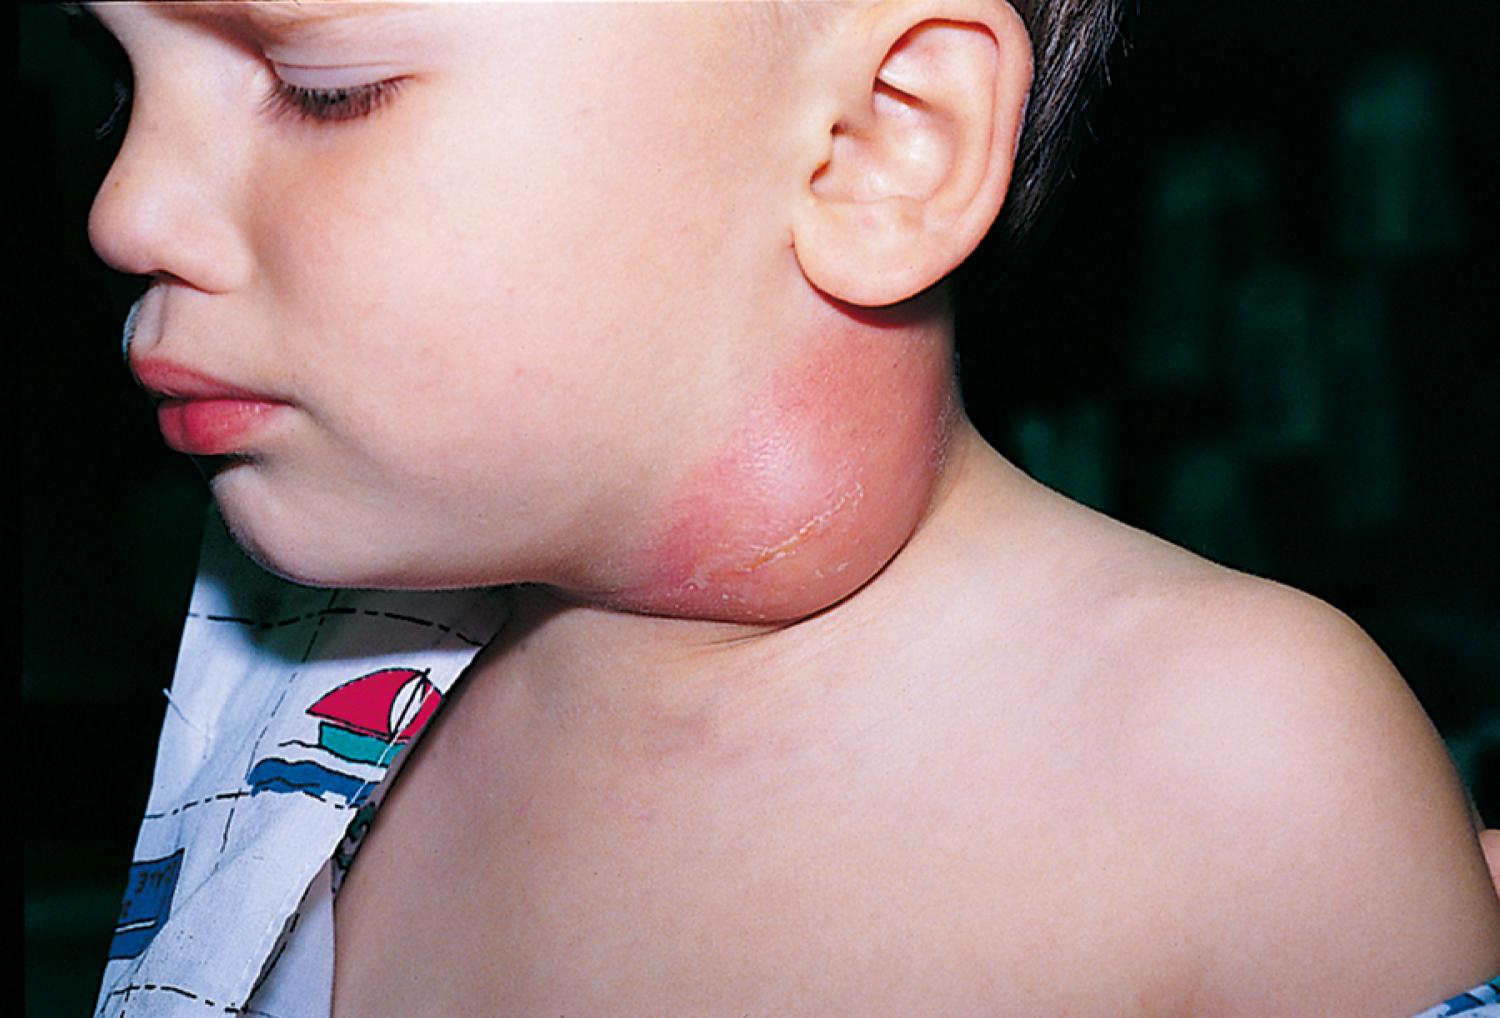 Fig. 18.1, Erythema and fluctuance identify the presence of an abscess. An abscess may be present without fluctuance, however, as the result of induration from surrounding inflammation.